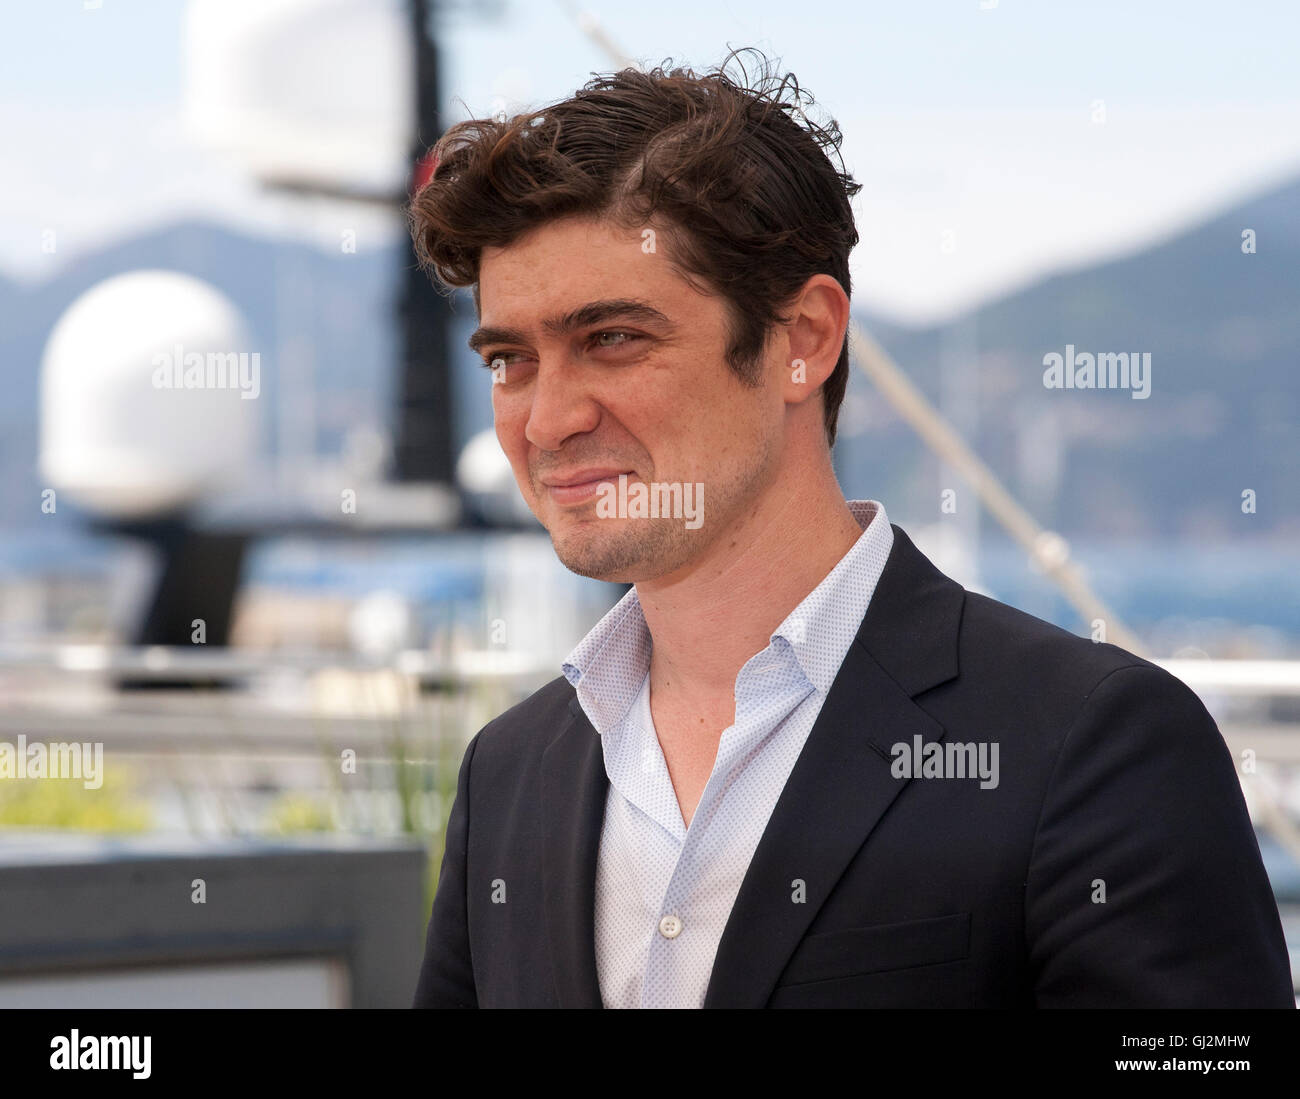 Actor and producer Riccardo Scamarcio at the Pericle (Pericle Il Nero) film photo call at the 69th Cannes Film Festival 2016 Stock Photo